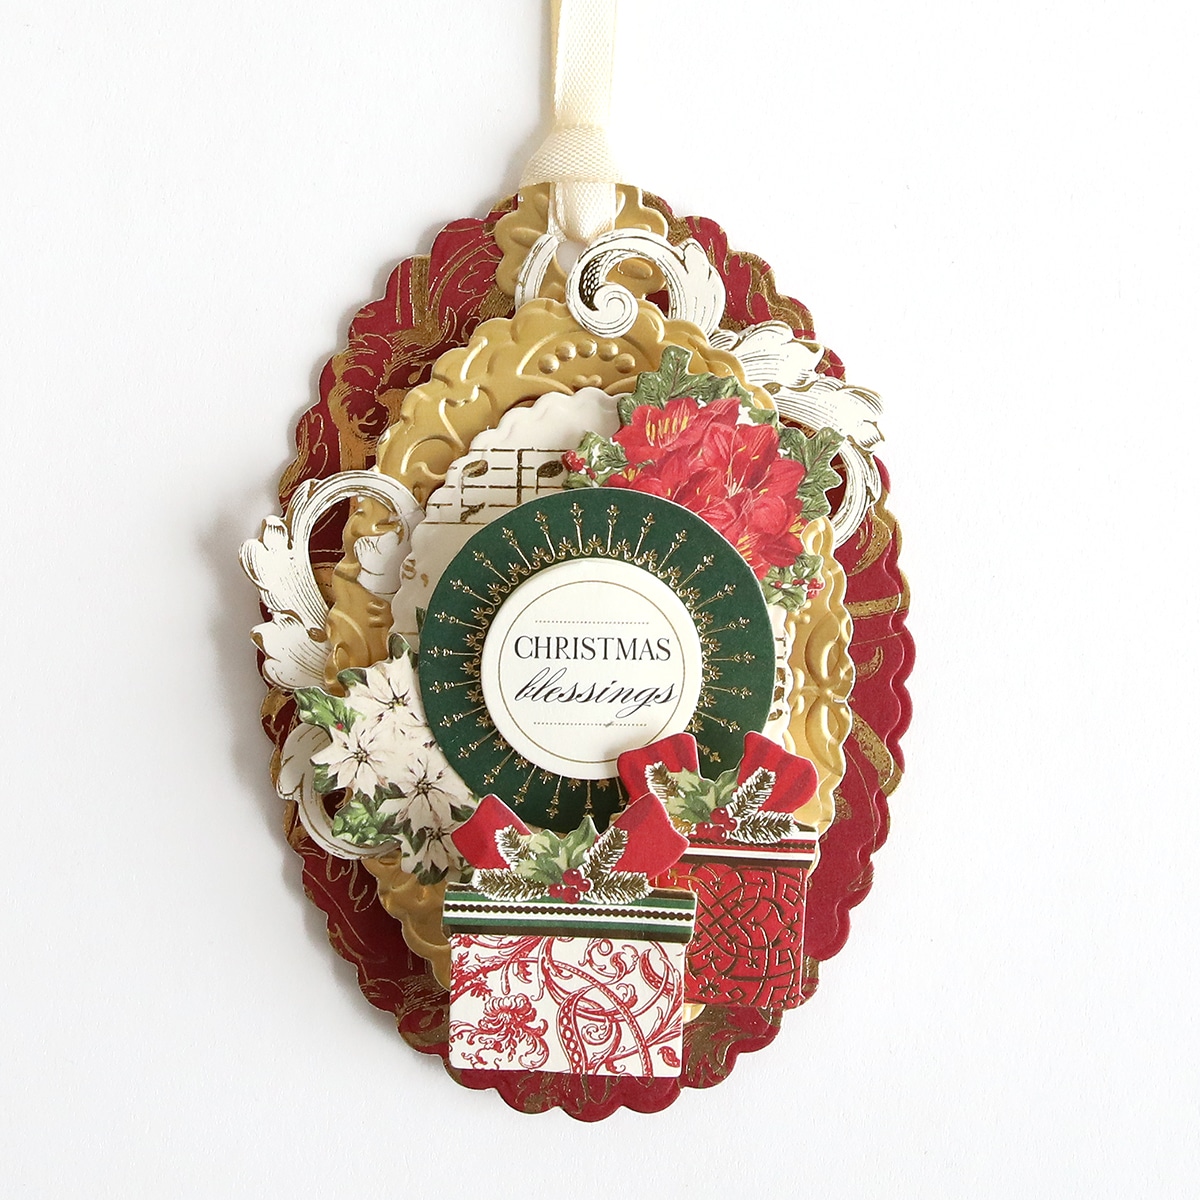 A christmas ornament hanging on a chain.